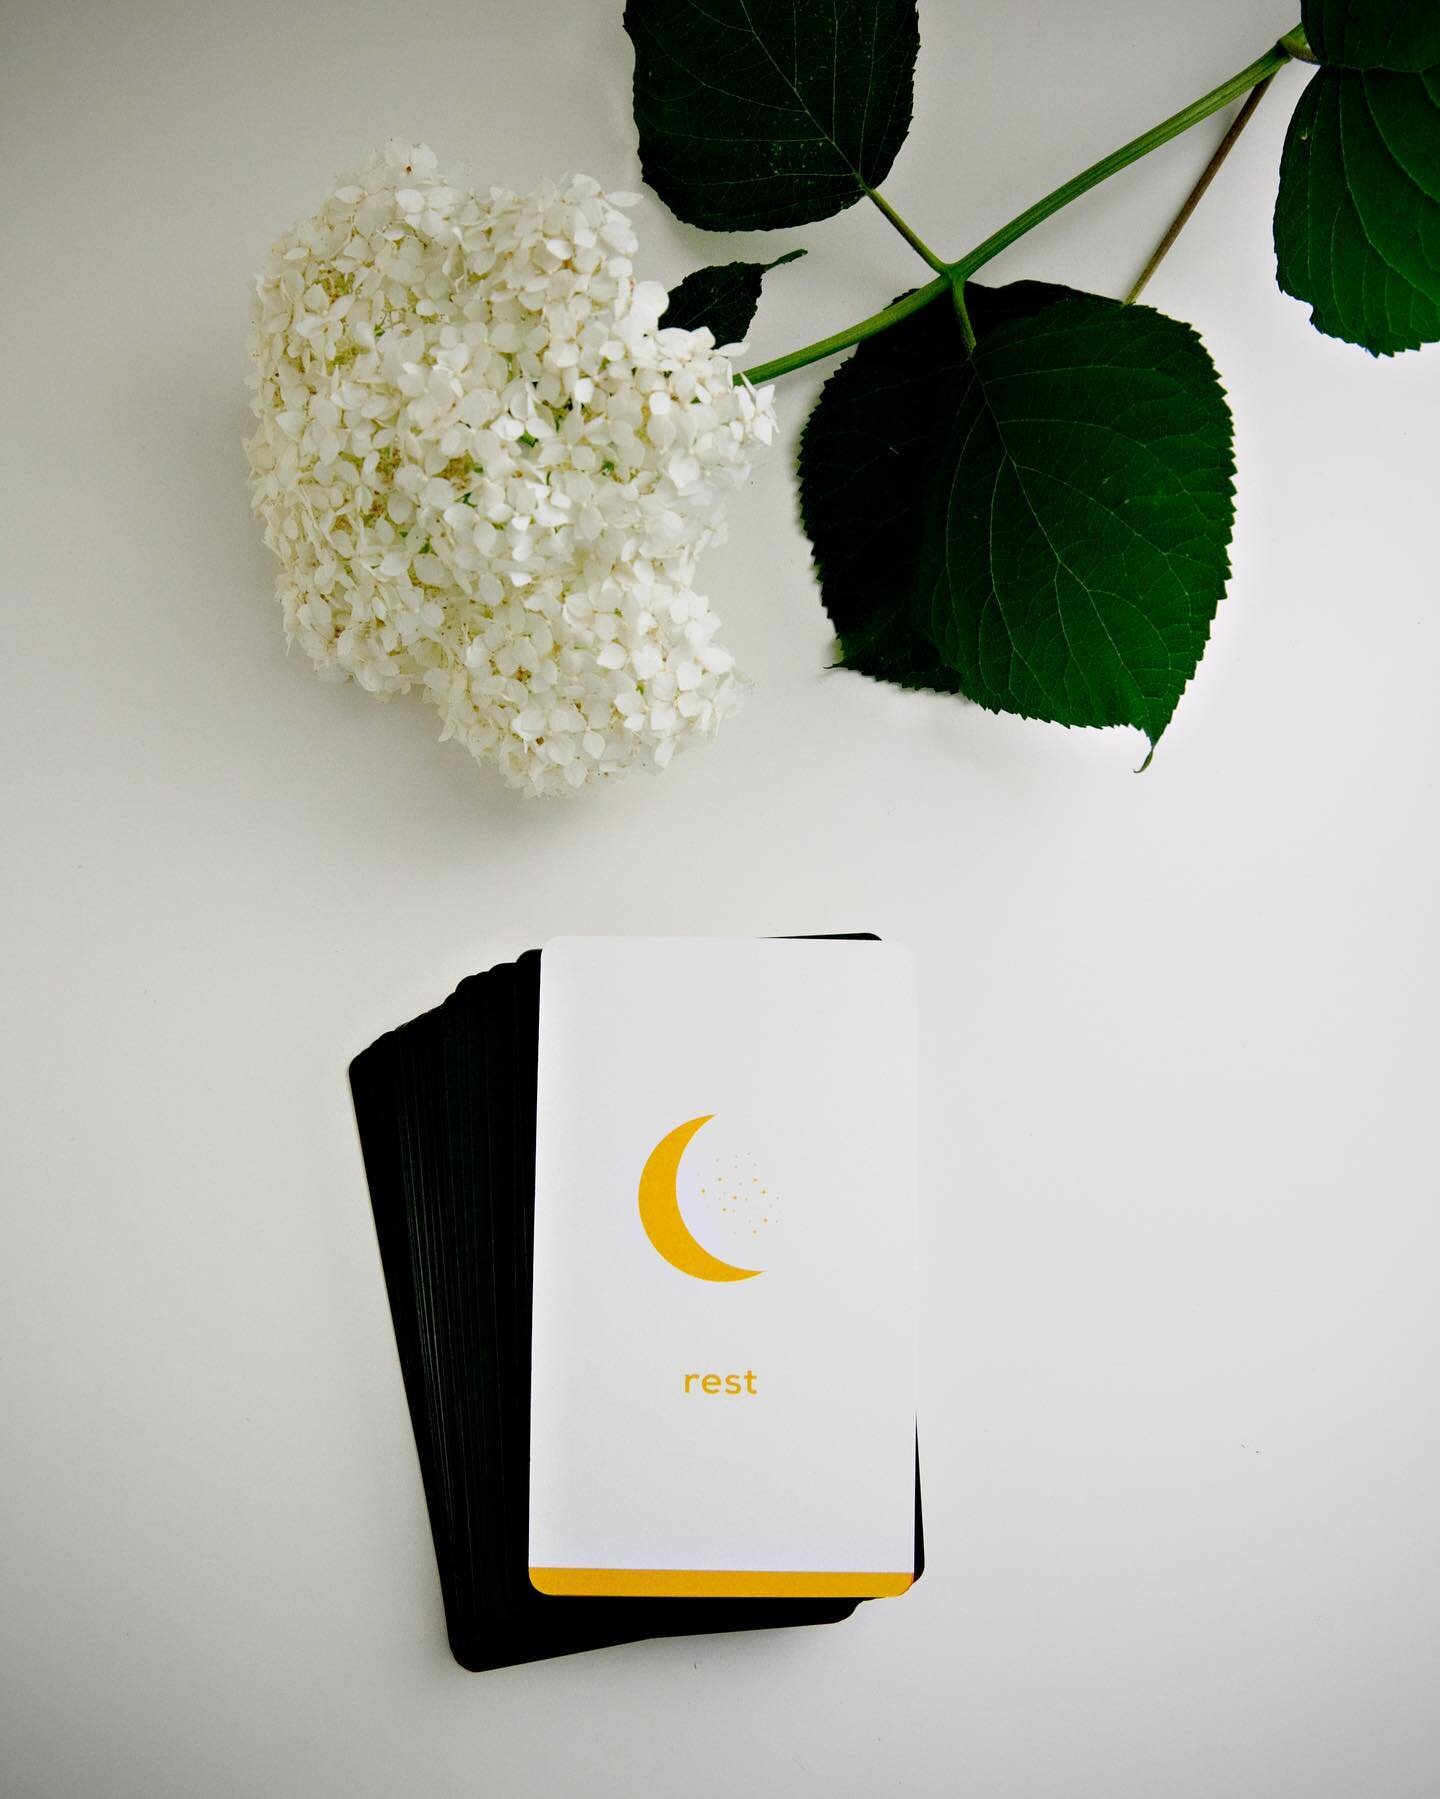 When in doubt&hellip; choose rest! ⁣
⁣
Rest solves problems. ⁣
⁣
Moon is in Cancer and Mercury finally goes direct again today. ⁣
⁣
Halle-freakin-lujah! ⁣
⁣
A new batch of the Money Compass Deck&reg; is being printed right now and start shipping mid-